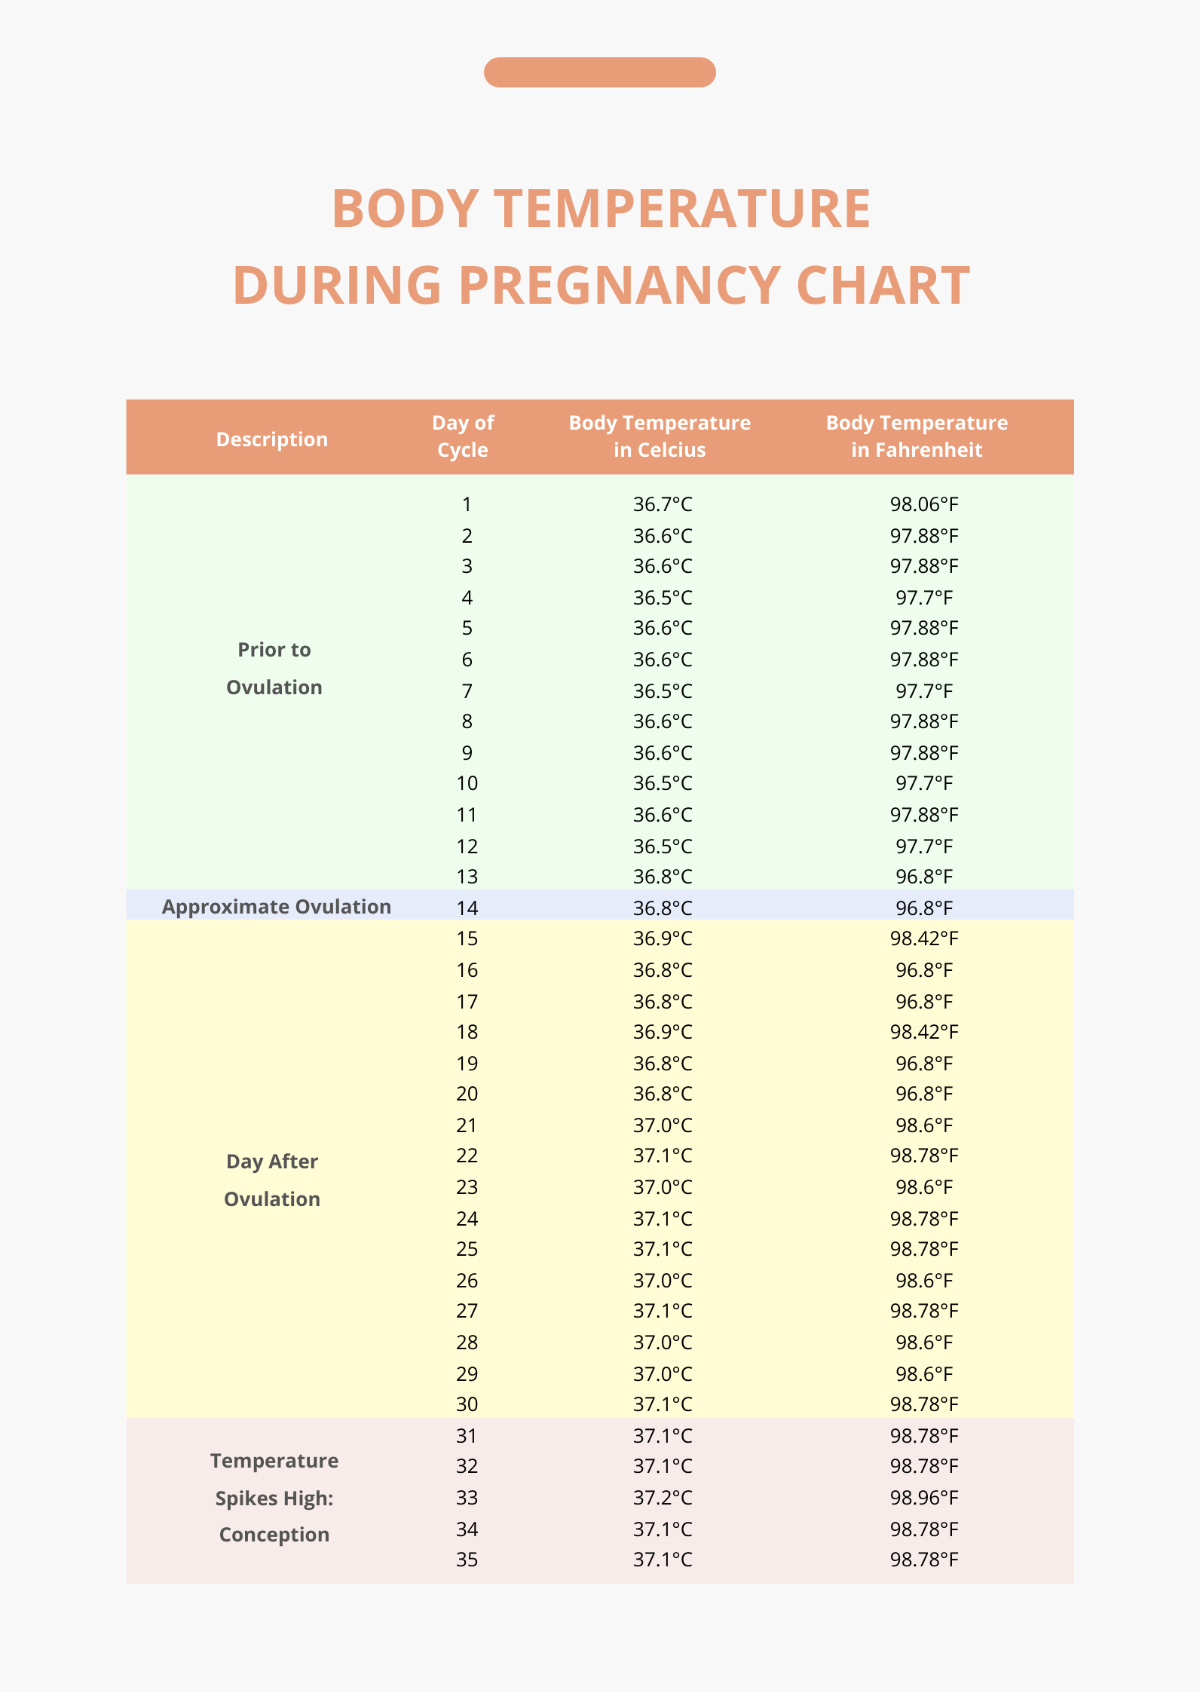 Body Temperature During Pregnancy Chart Template